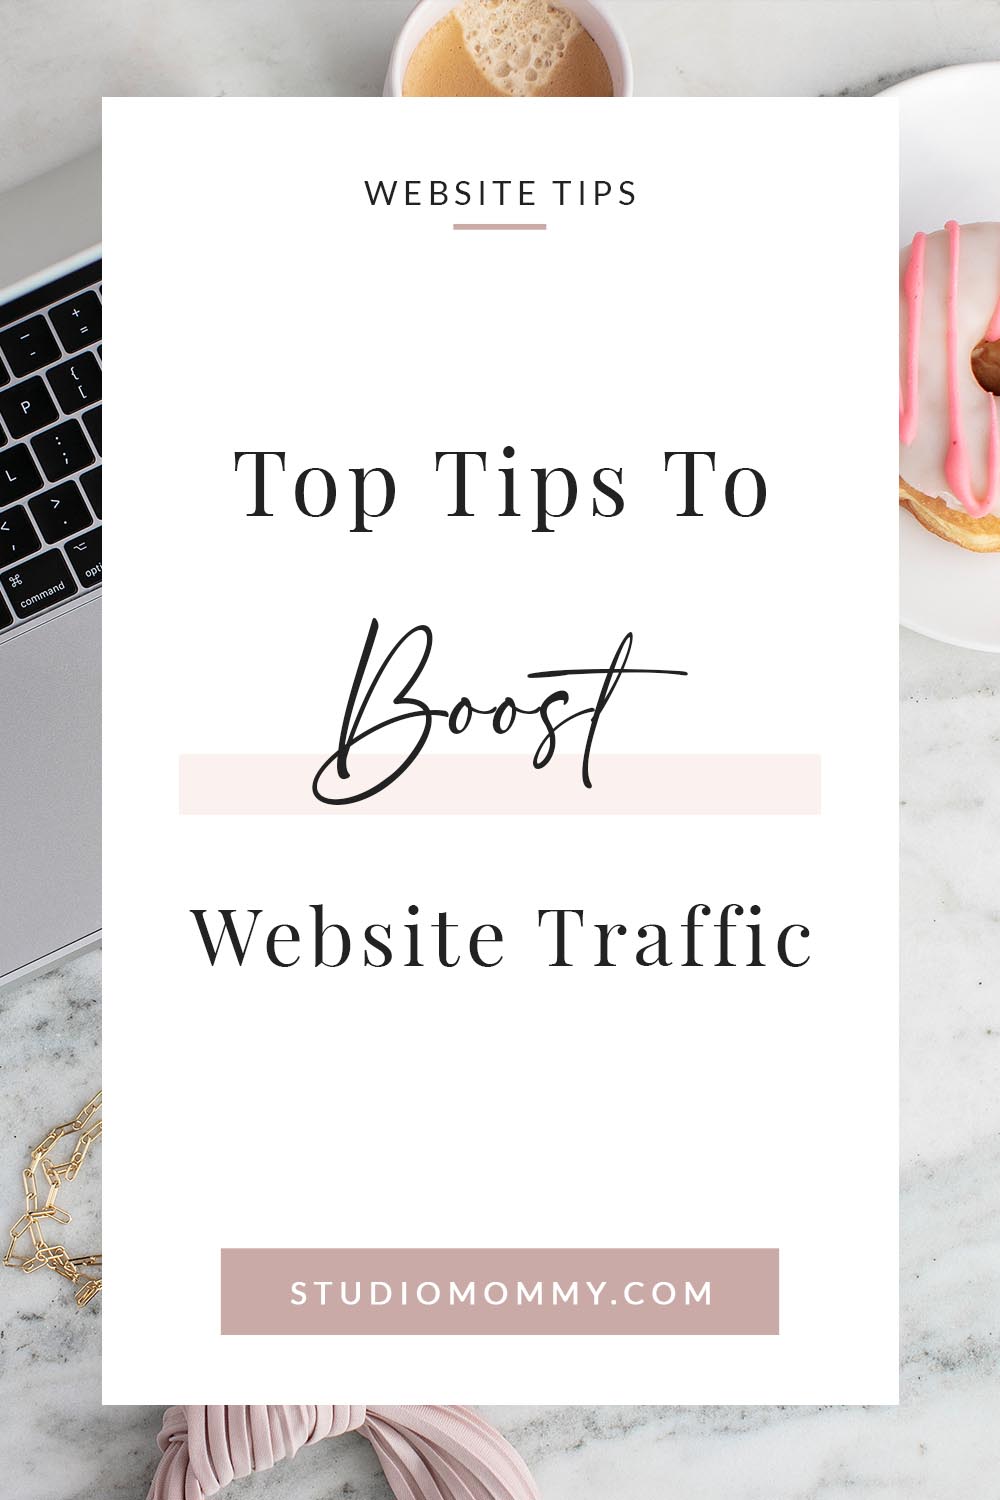 It is important to have good website traffic. Website traffic plays an important role in increasing your sales and getting potential customers. Website traffic also helps websites to get ranked higher in search results. Here are some effective tips to boost website traffic. @studiomommy